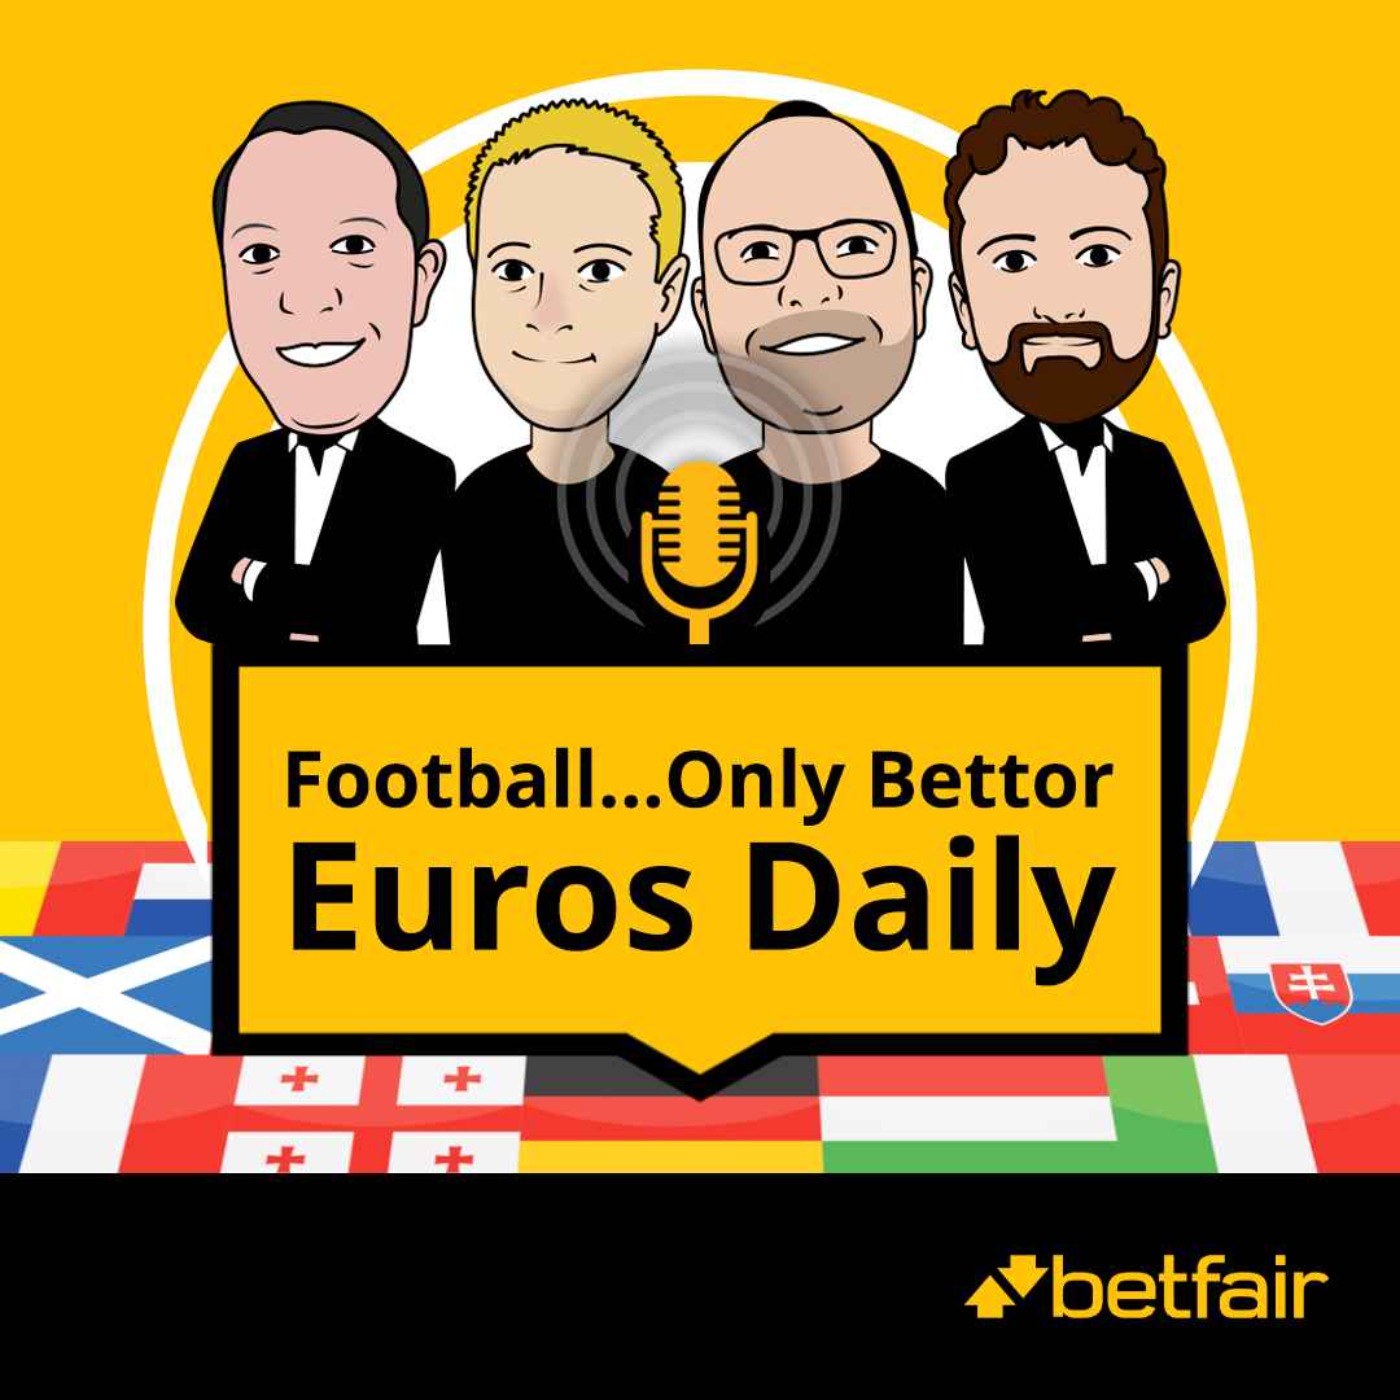 Germany 5-1 Scotland reaction & Saturday tips | Football...Only Bettor: Euros Daily